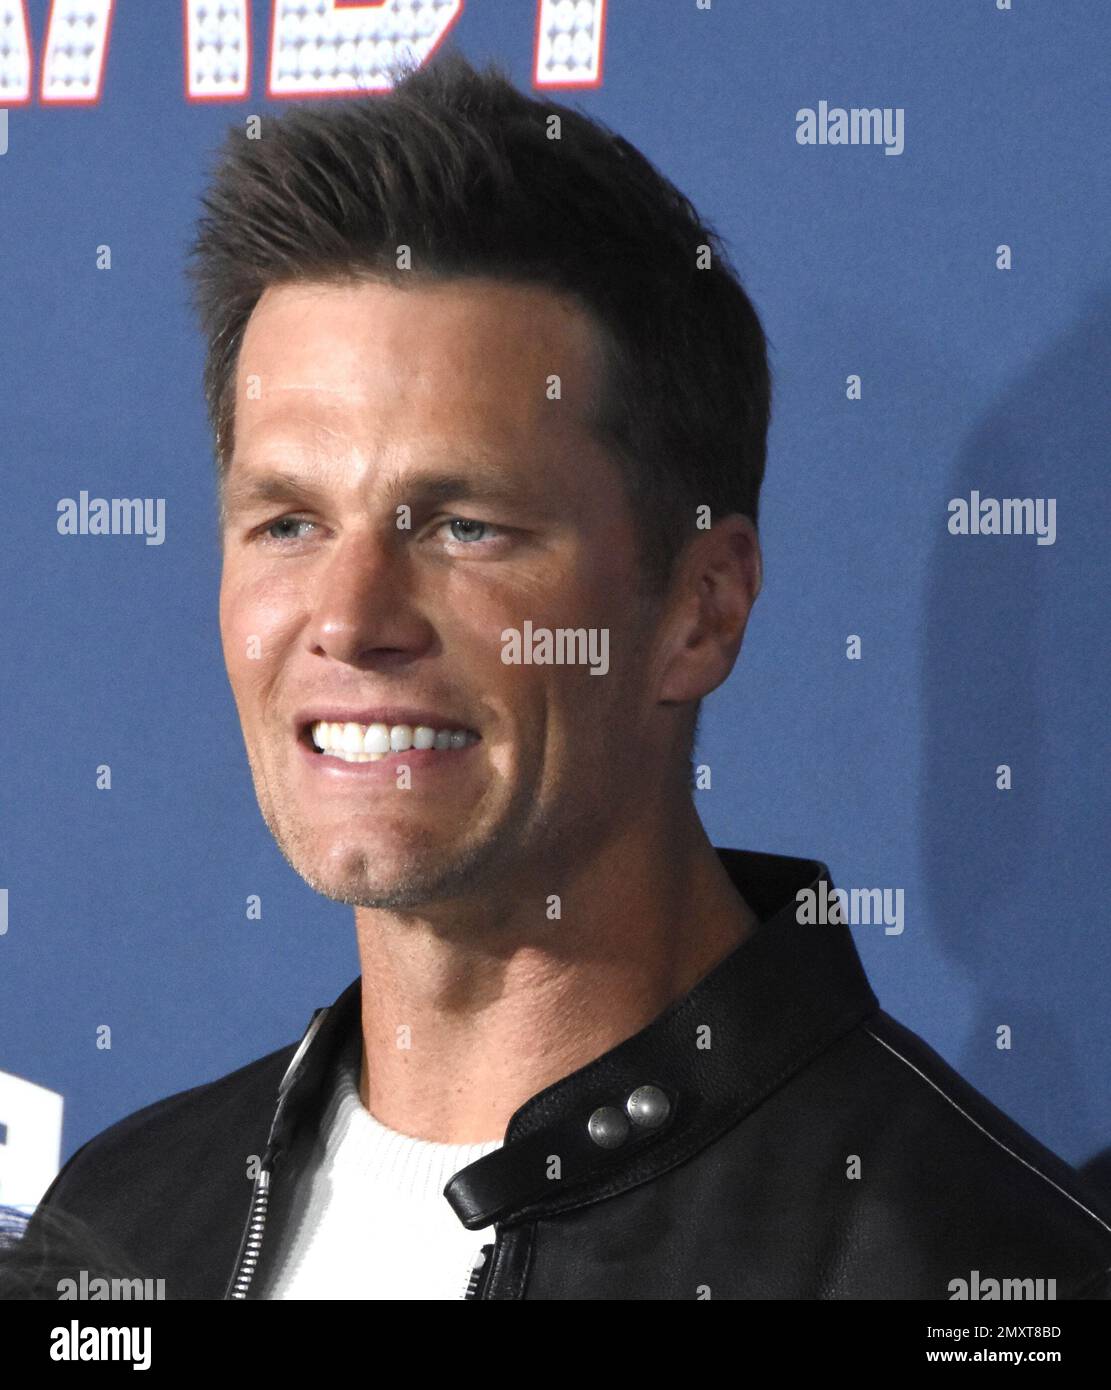 Los Angeles, California, USA 31st January 2023 Tom Brady attends the Los Angeles Premiere Screening of Paramount Pictures' '80 for Brady' at Regency Village Theatre on January 31, 2023 in Los Angeles, California, USA. Photo by Barry King/Alamy Stock Photo Stock Photo